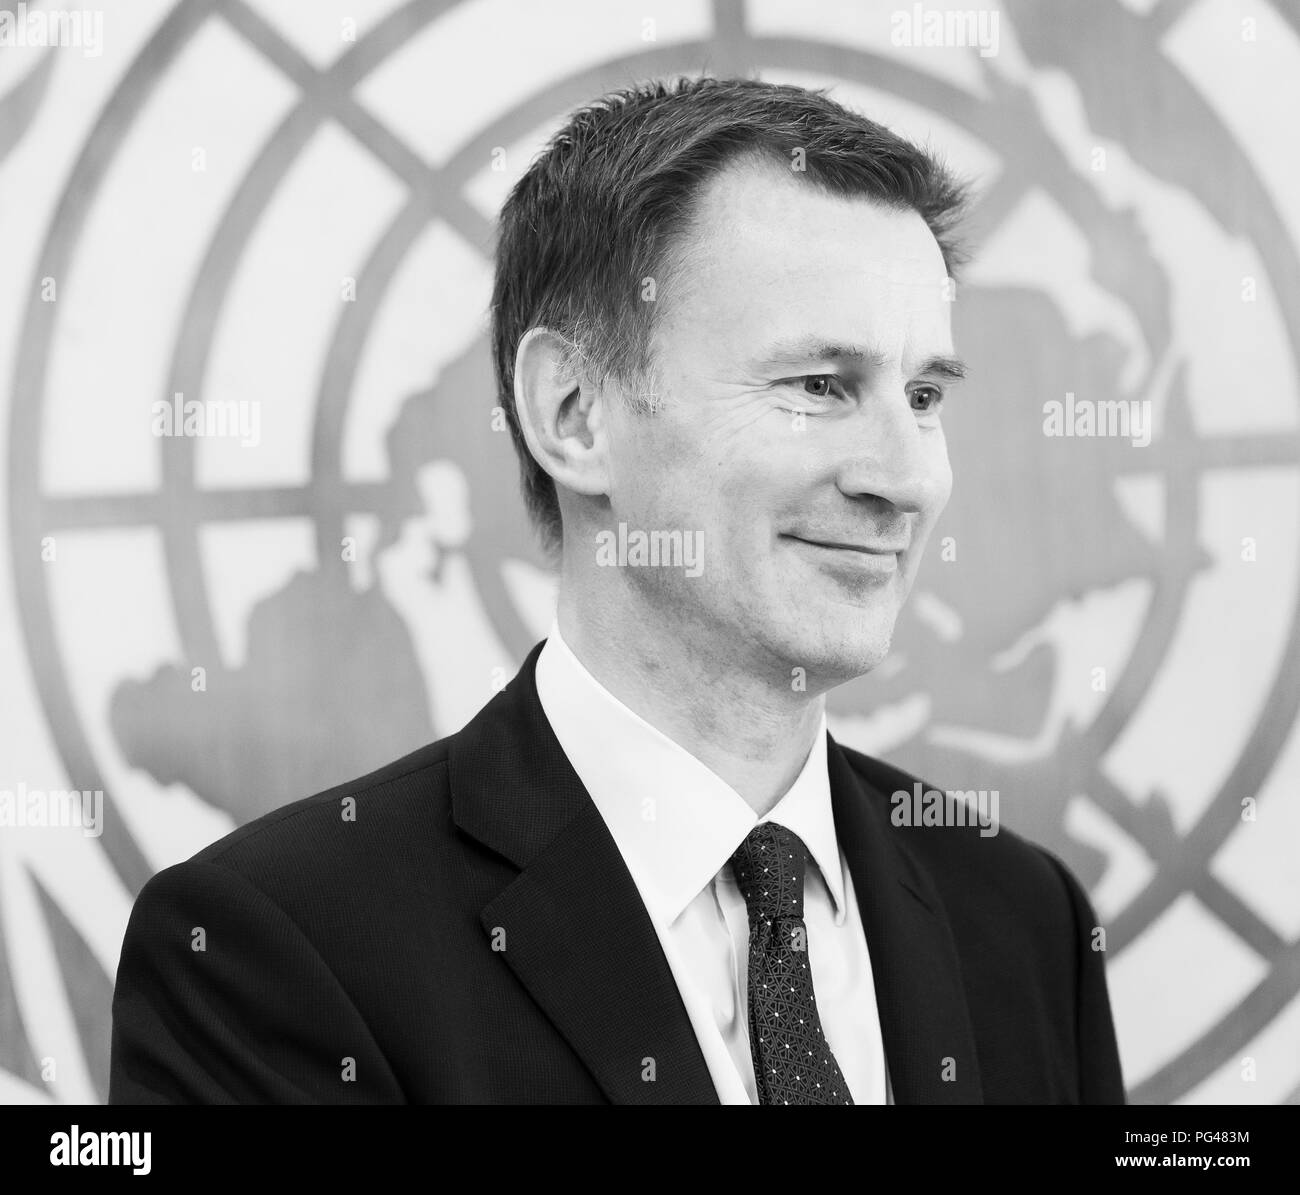 Jeremy hunt Black and White Stock Photos & Images Alamy